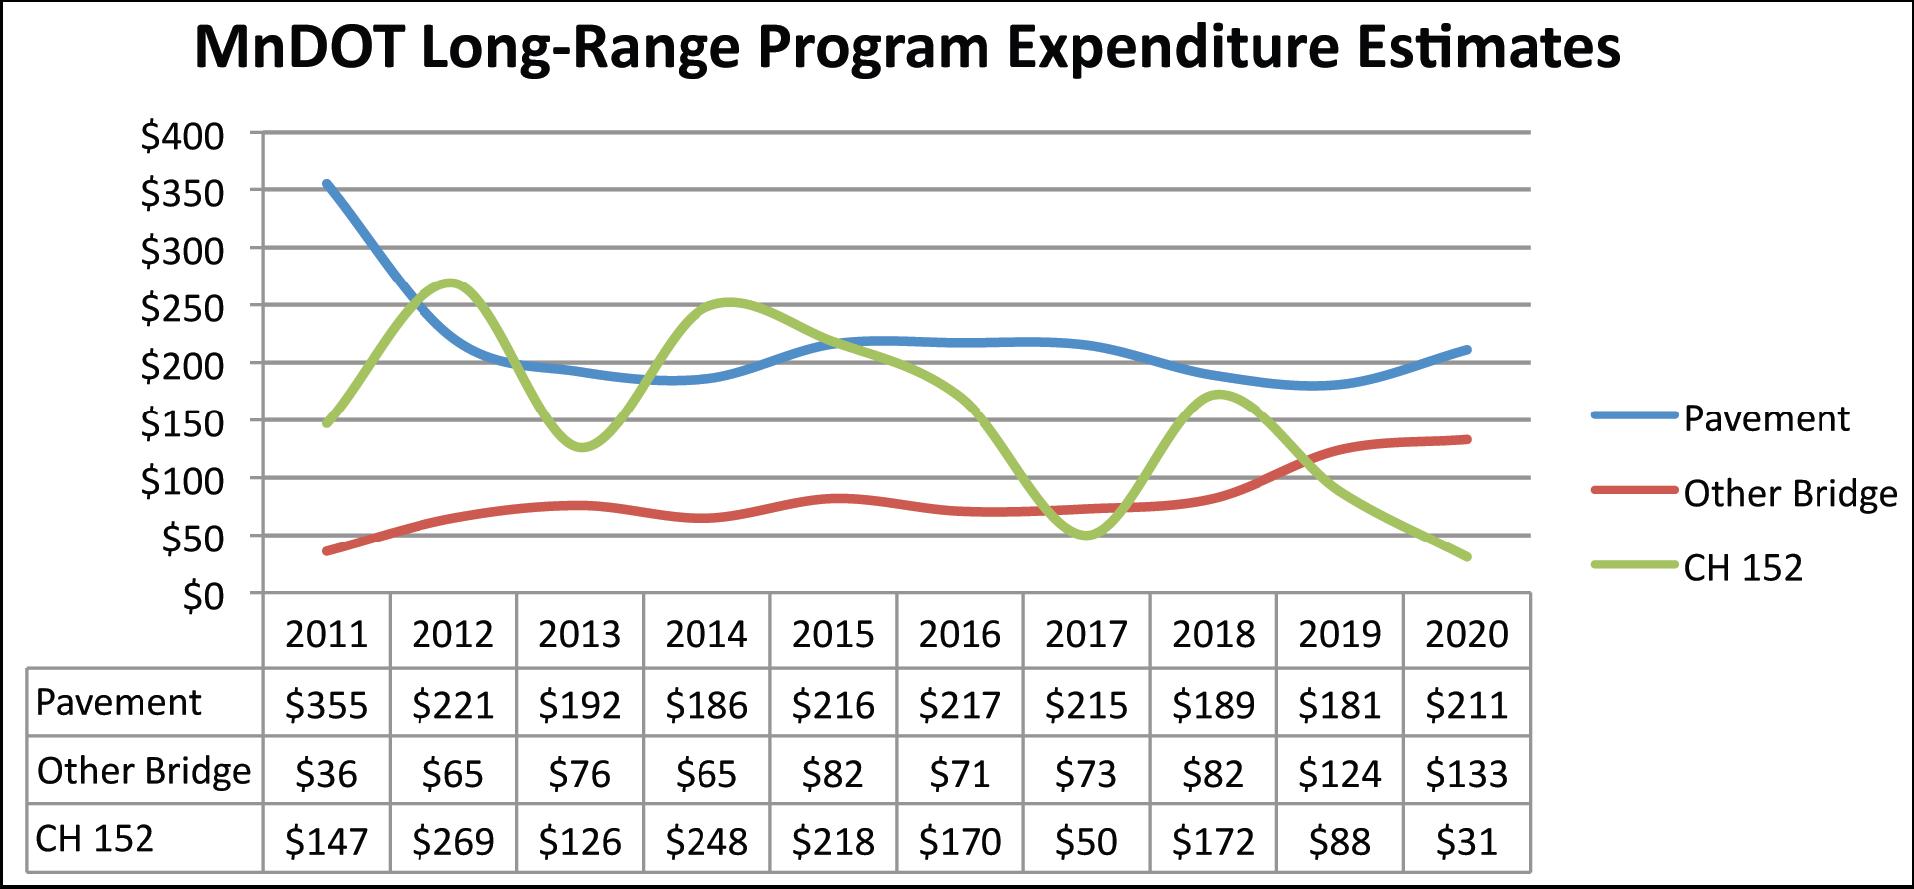 Figure 47 illustrates how the expenditures for chapter 152 bridge funds changes over time, compared to expenditures for other bridges and for pavements.  The period of time covered is from 2011 to 2020. The trend lines show that pavement expenditures fall considerably from a high of 355 million in 2011 to 211 million in 2020.  The chapter 152 bridge funds vary year to year but range from 146 million in 2013 to a high of 268 million before declining to 31 million in 2020.  During the same period of 2011 to 2020, the other bridge expenditures steadily rise from 36 point three million in 2011 to 132 million by 2020.